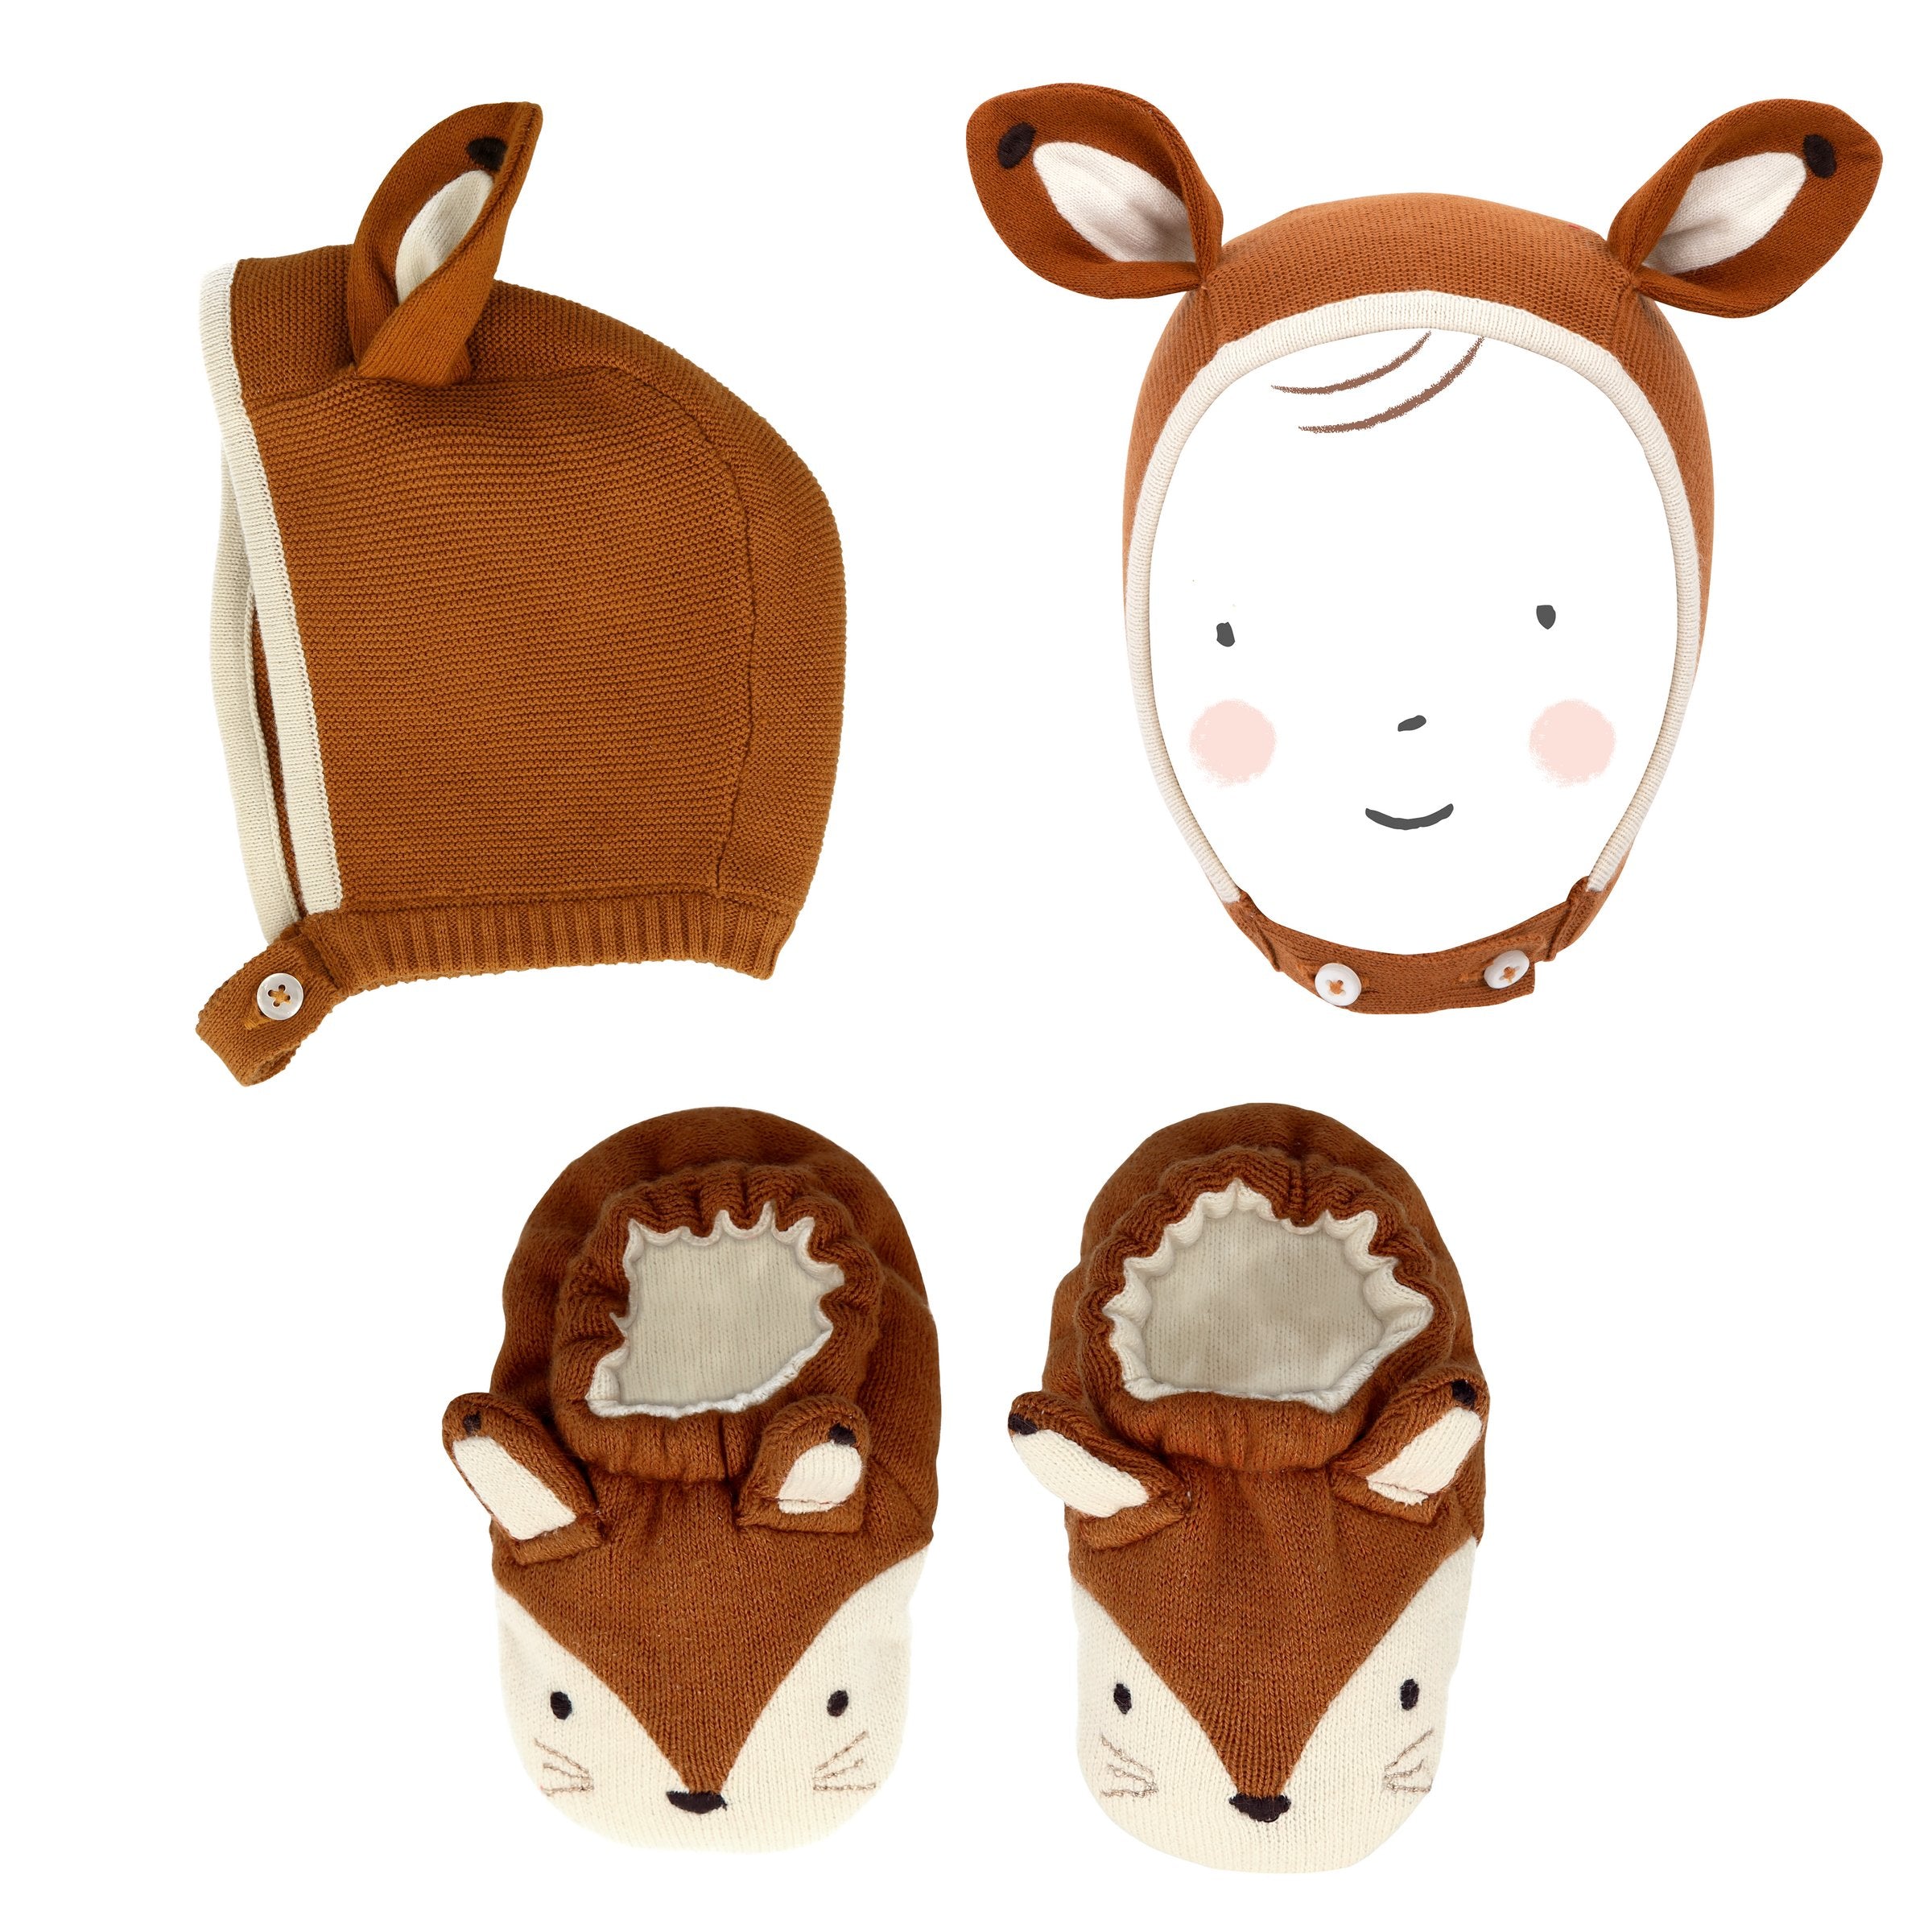 If you're looking for a Christmas gift for babies then our fox organic cotton booties and bonnet set is a must.